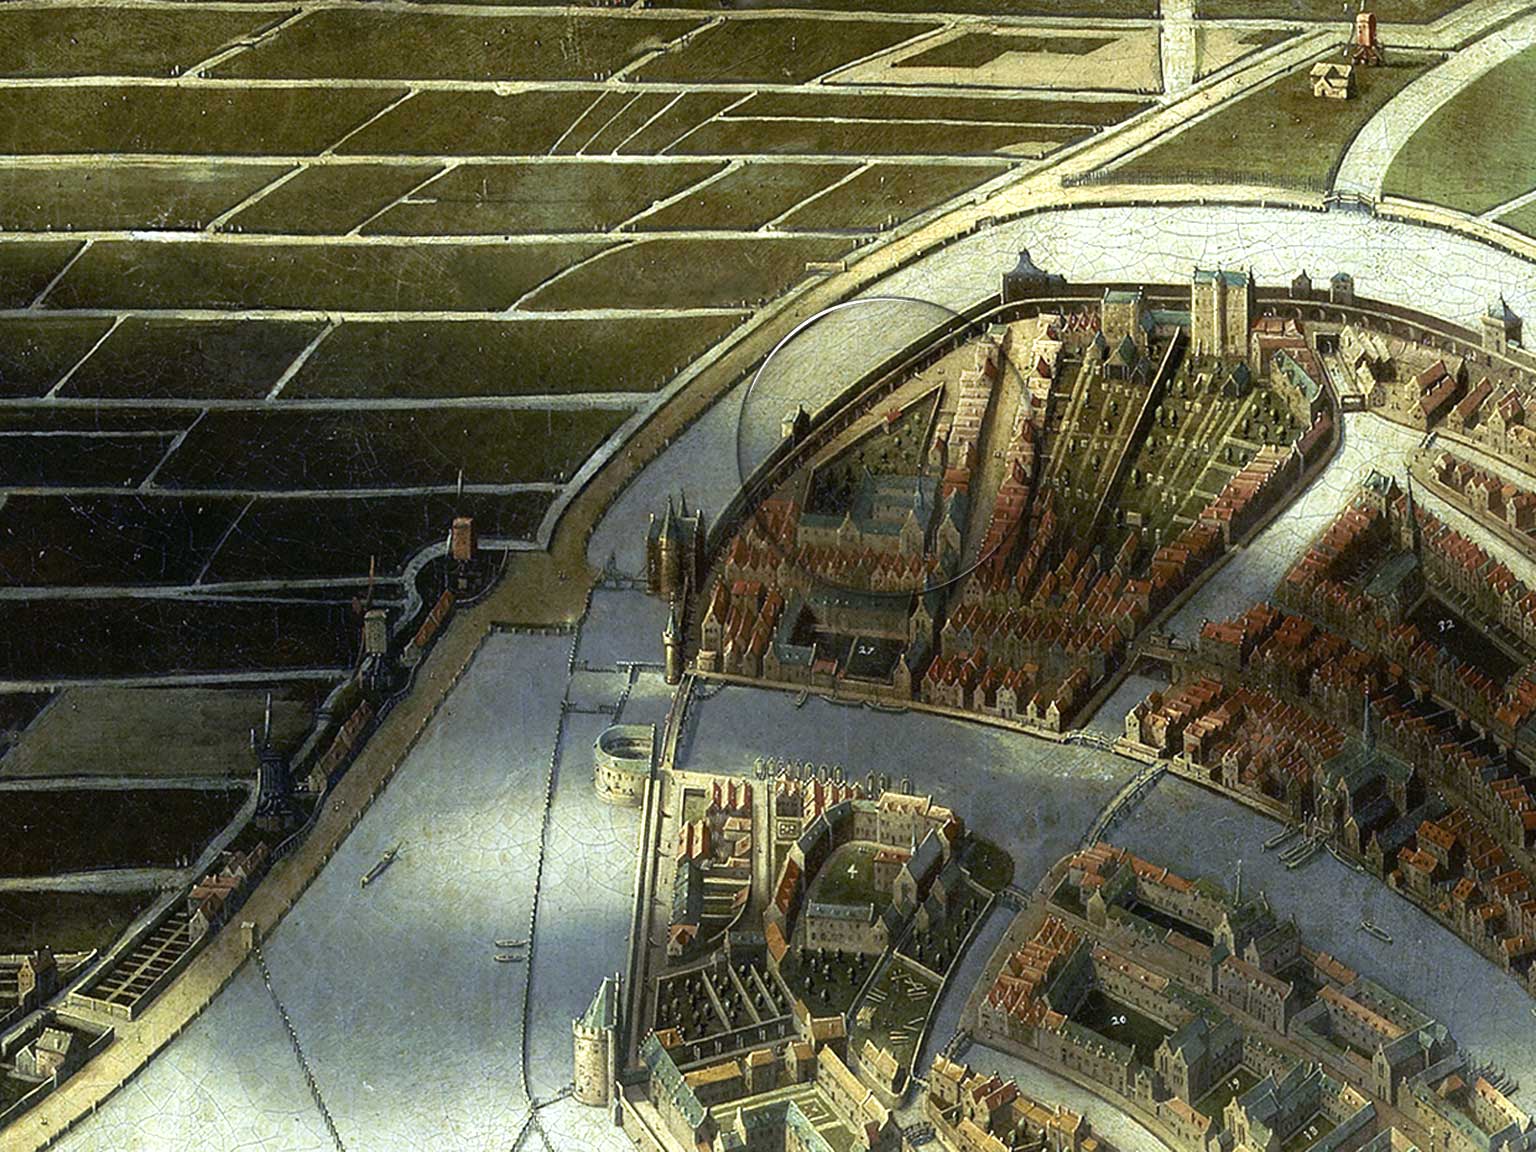 Clarissenklooster, Heiligeweg, Amsterdam, on an oil painting by Jan Micker from 1652